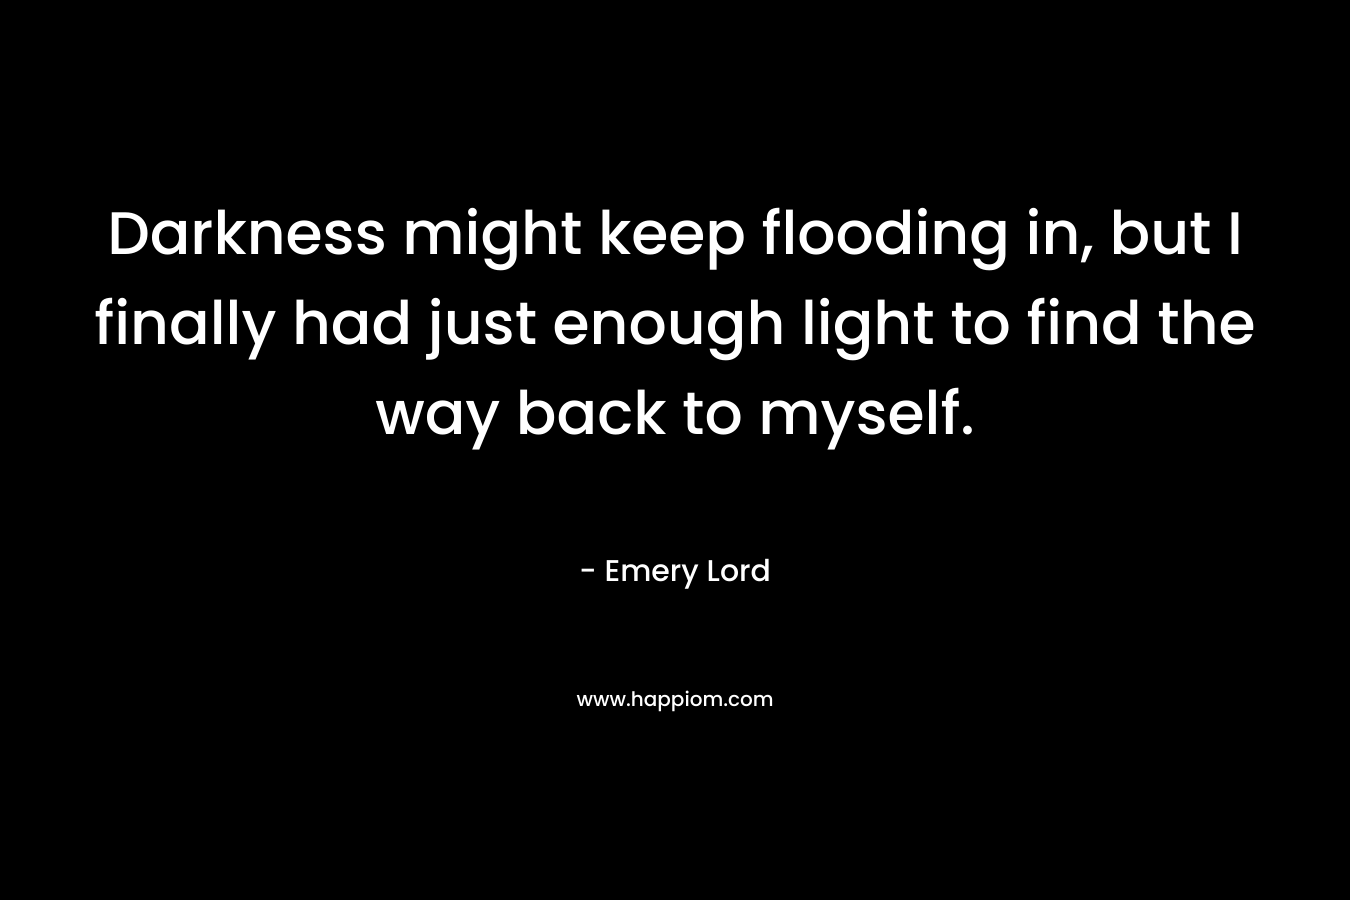 Darkness might keep flooding in, but I finally had just enough light to find the way back to myself.